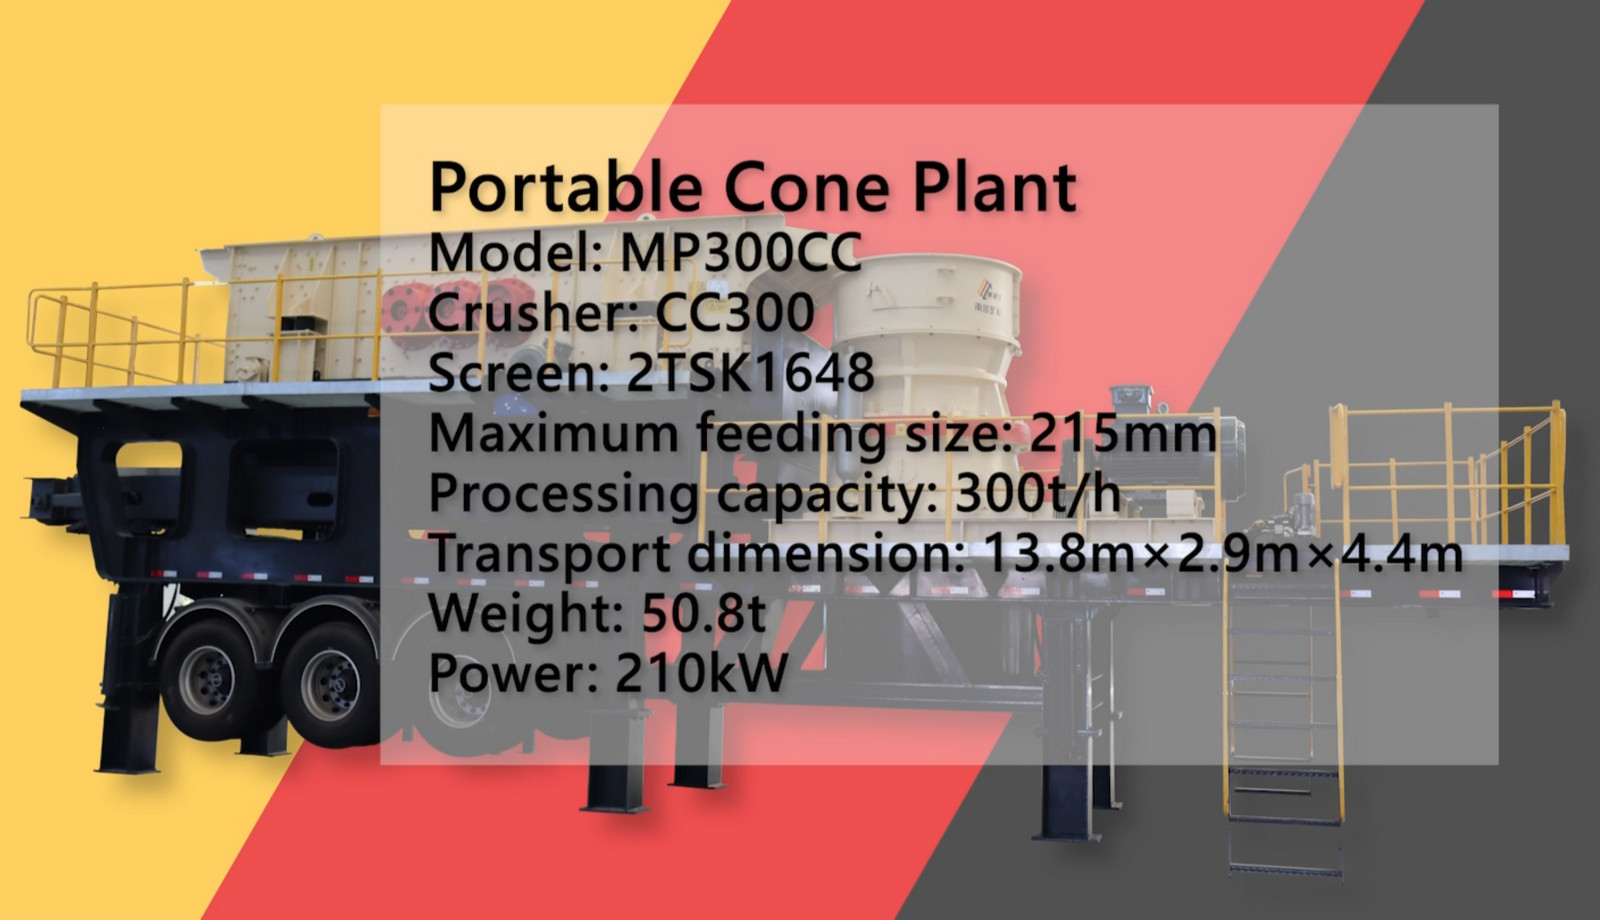 Introduction of MP300CC Portable Cone Plant